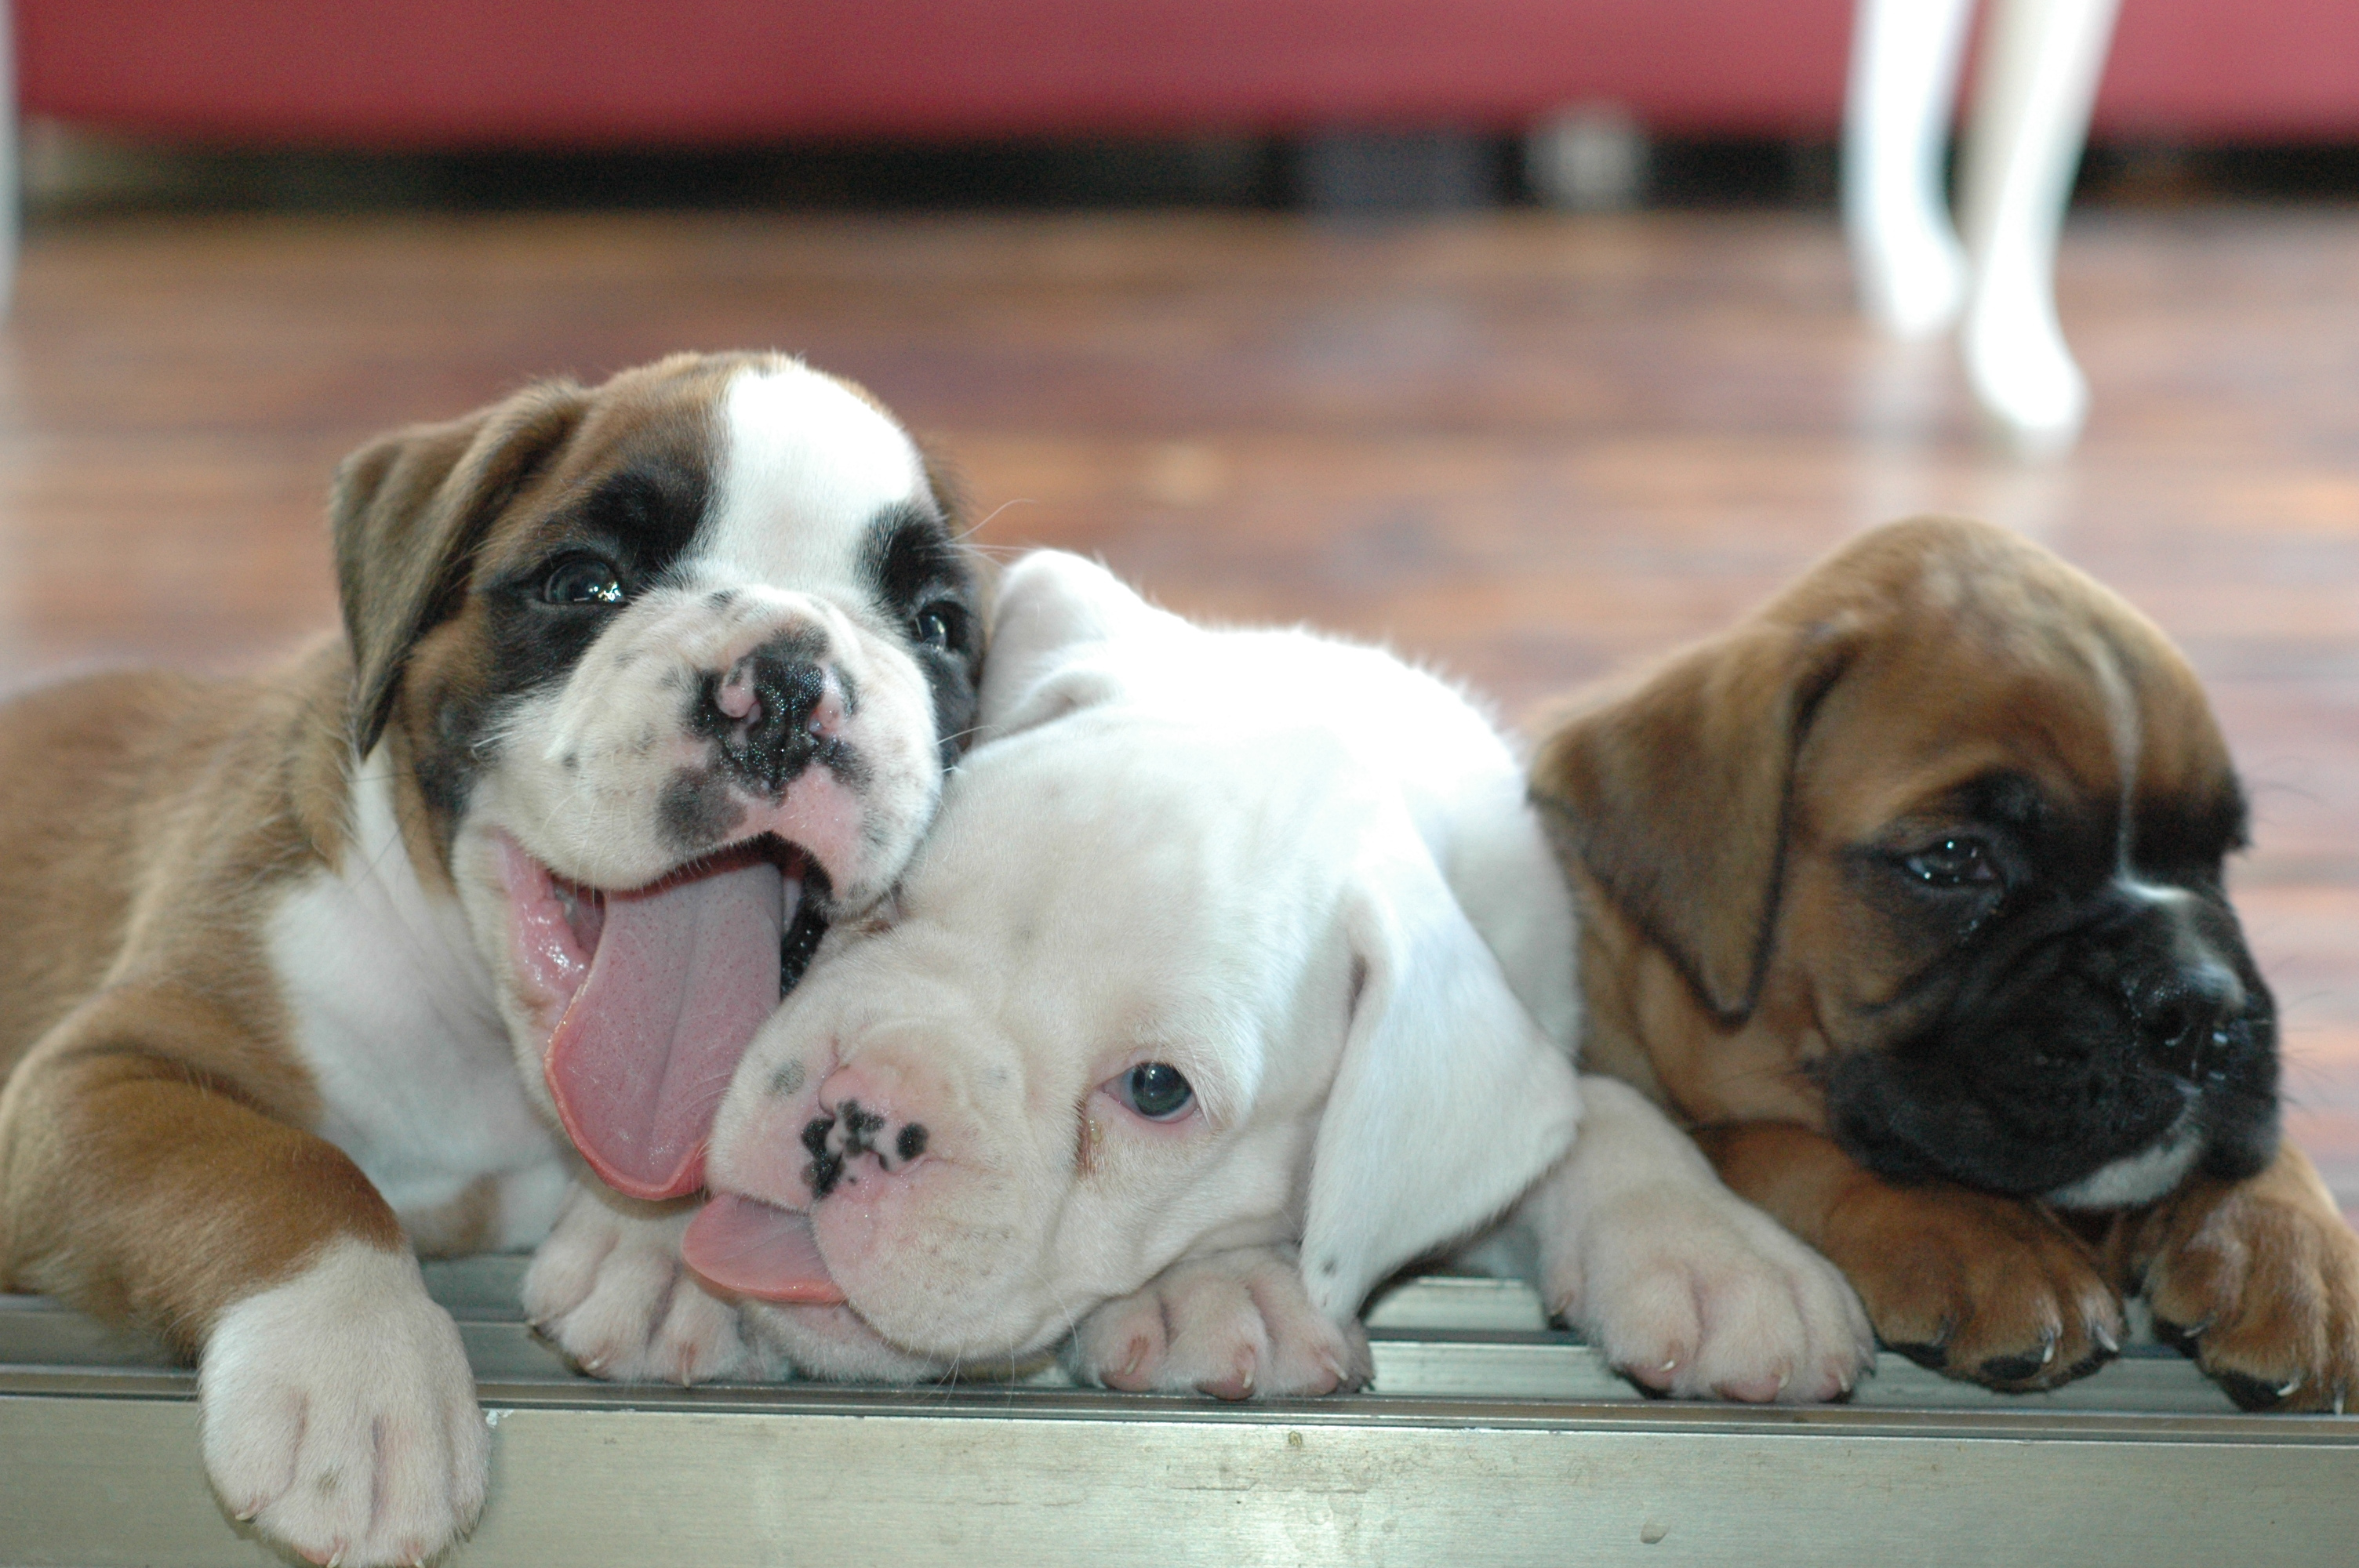 The world's most adorable puppies